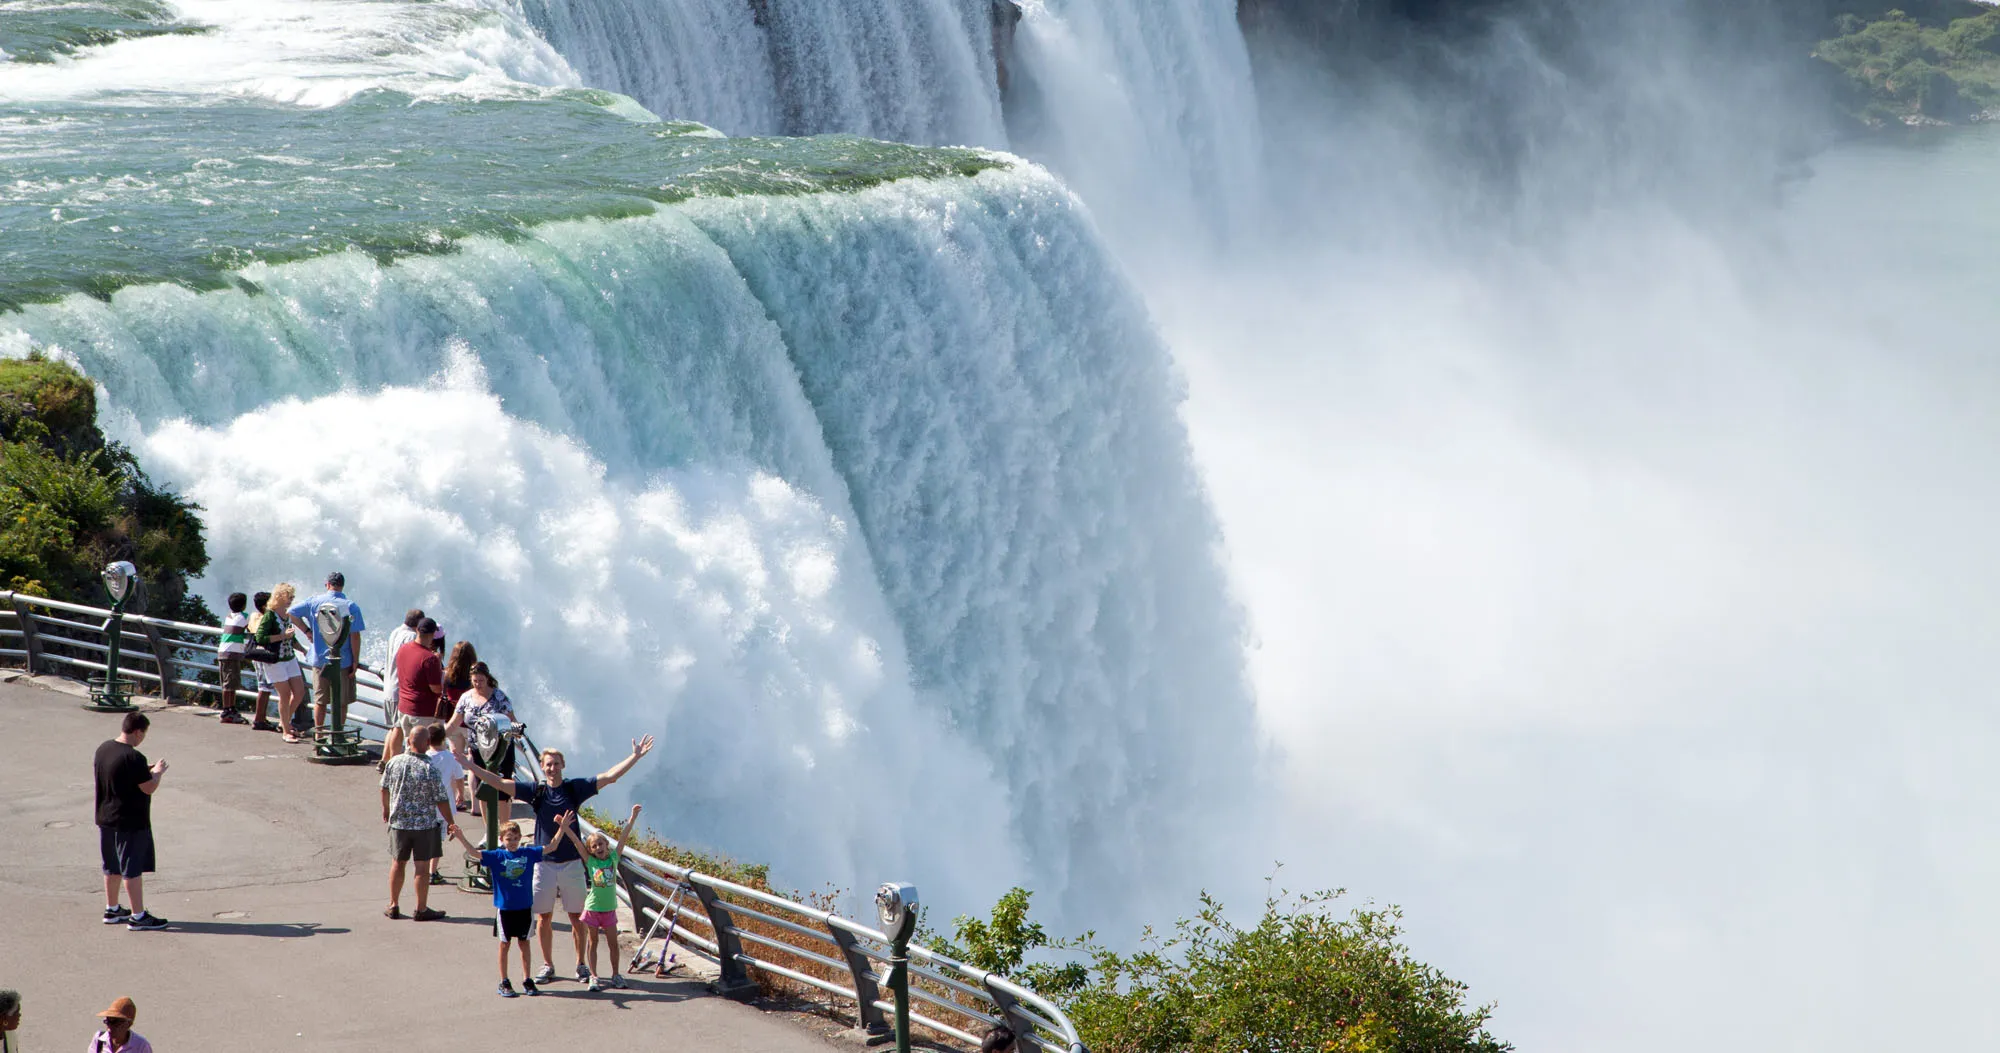 Featured image for “48 Hours in Niagara Falls: The Perfect Itinerary”